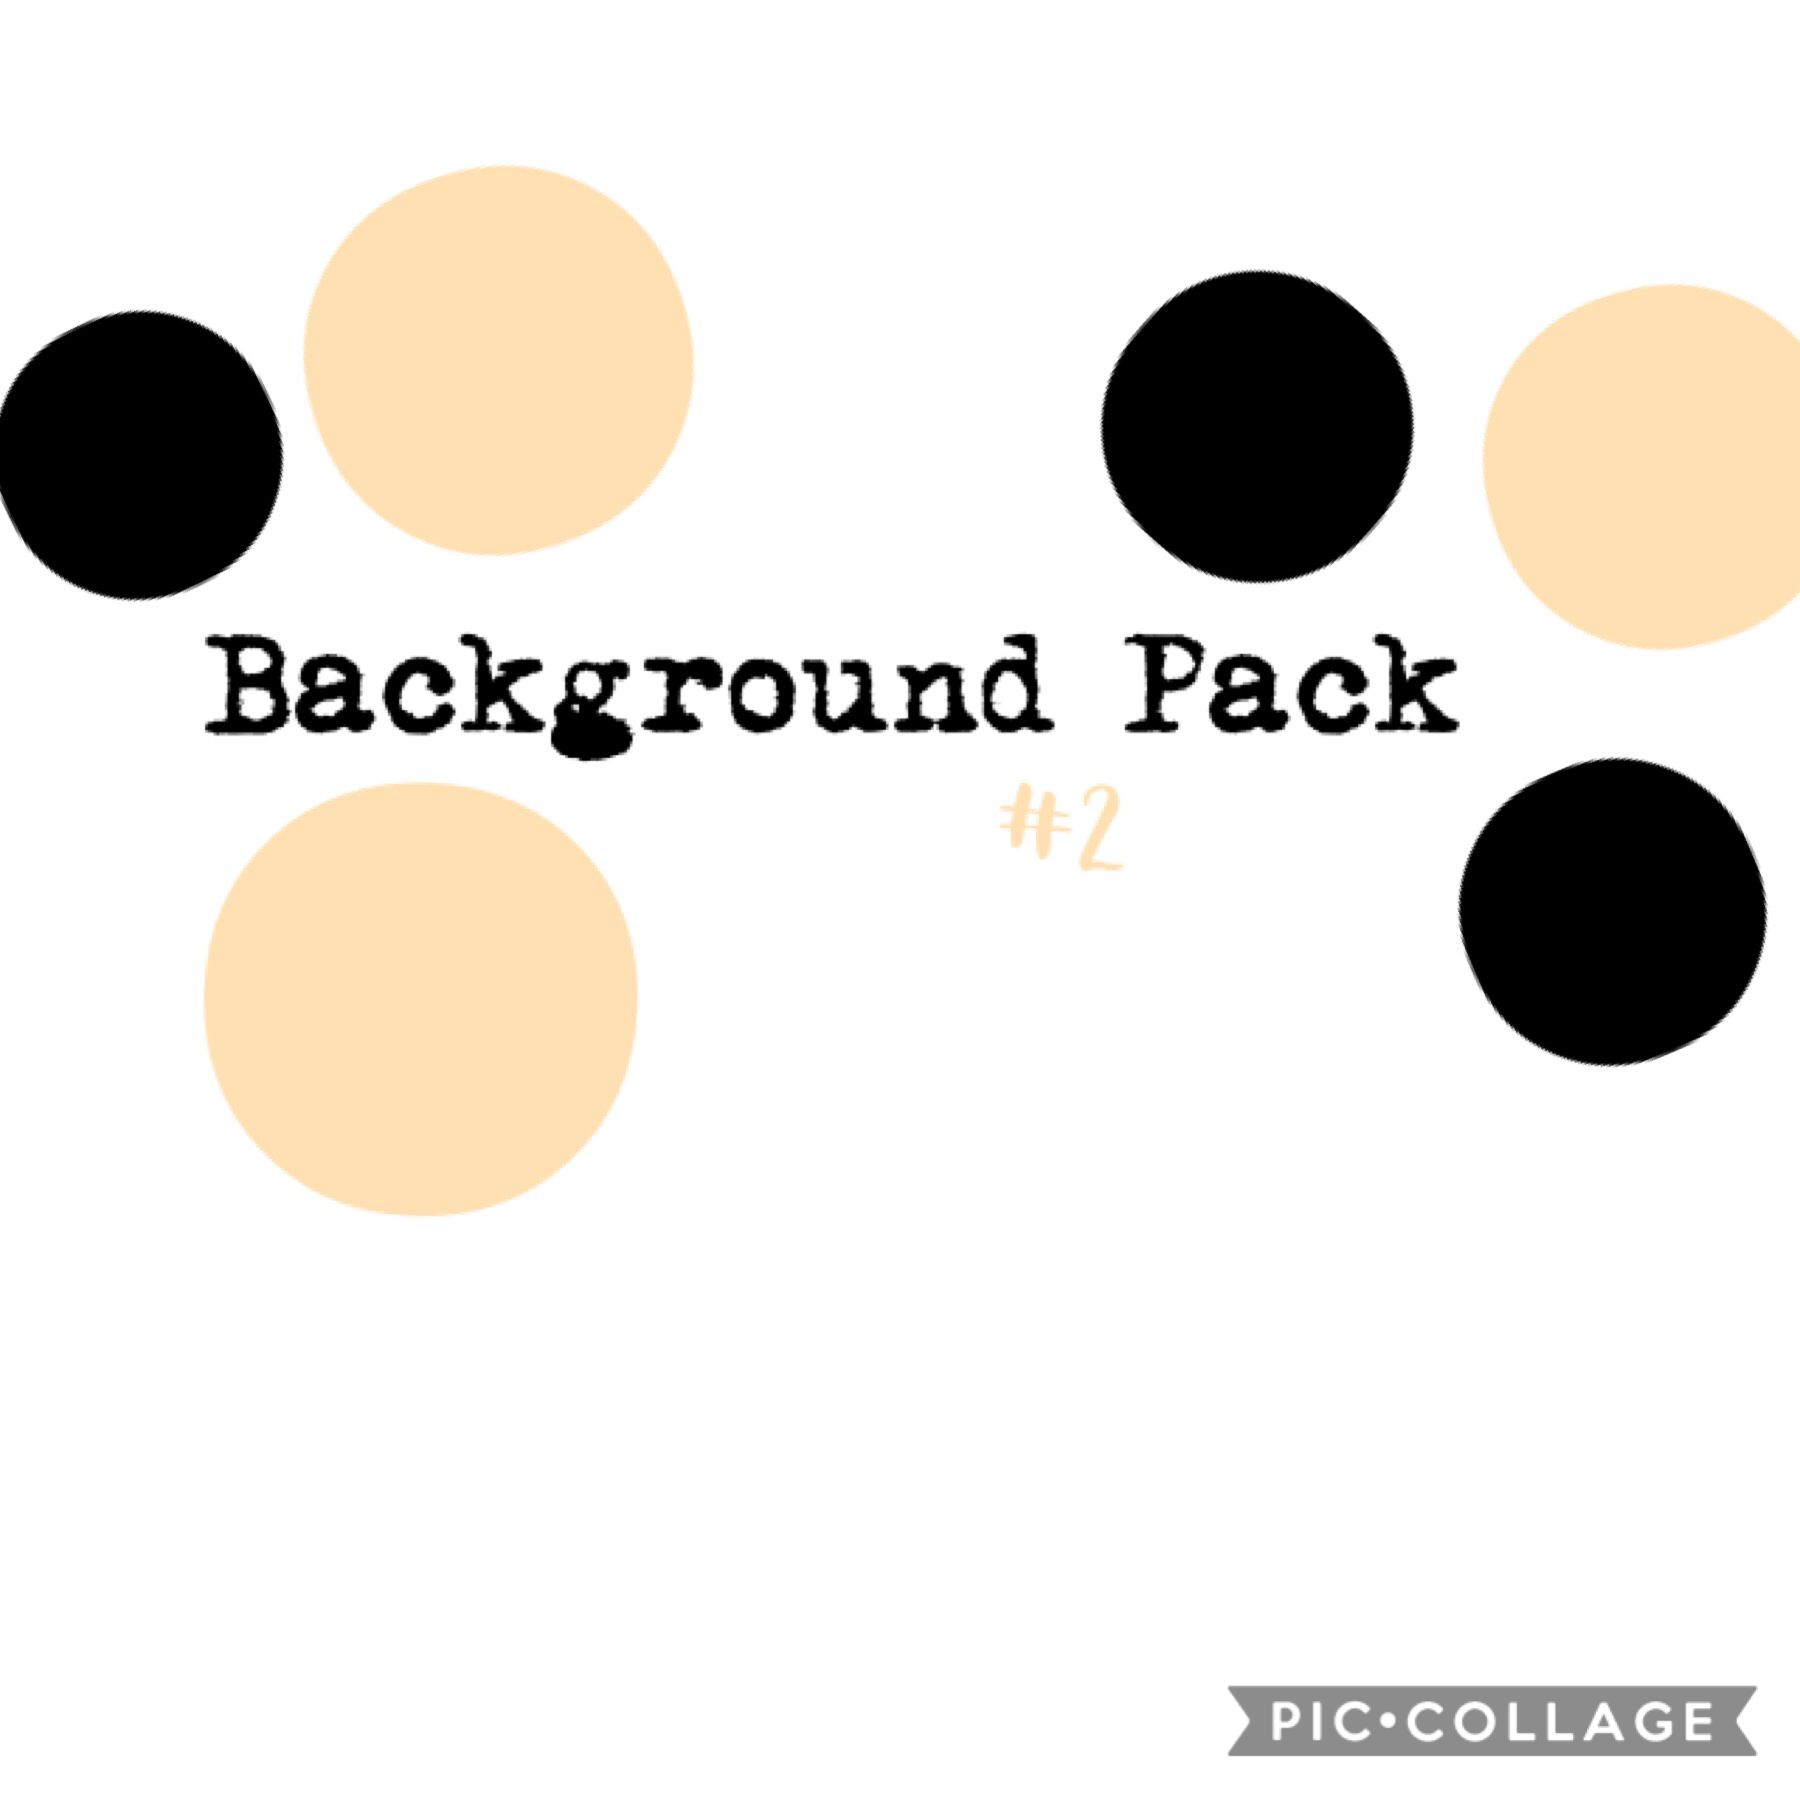 Background pack #2! Tap!
This pack is wanderlust themed. Only accepting 3 more reviews.